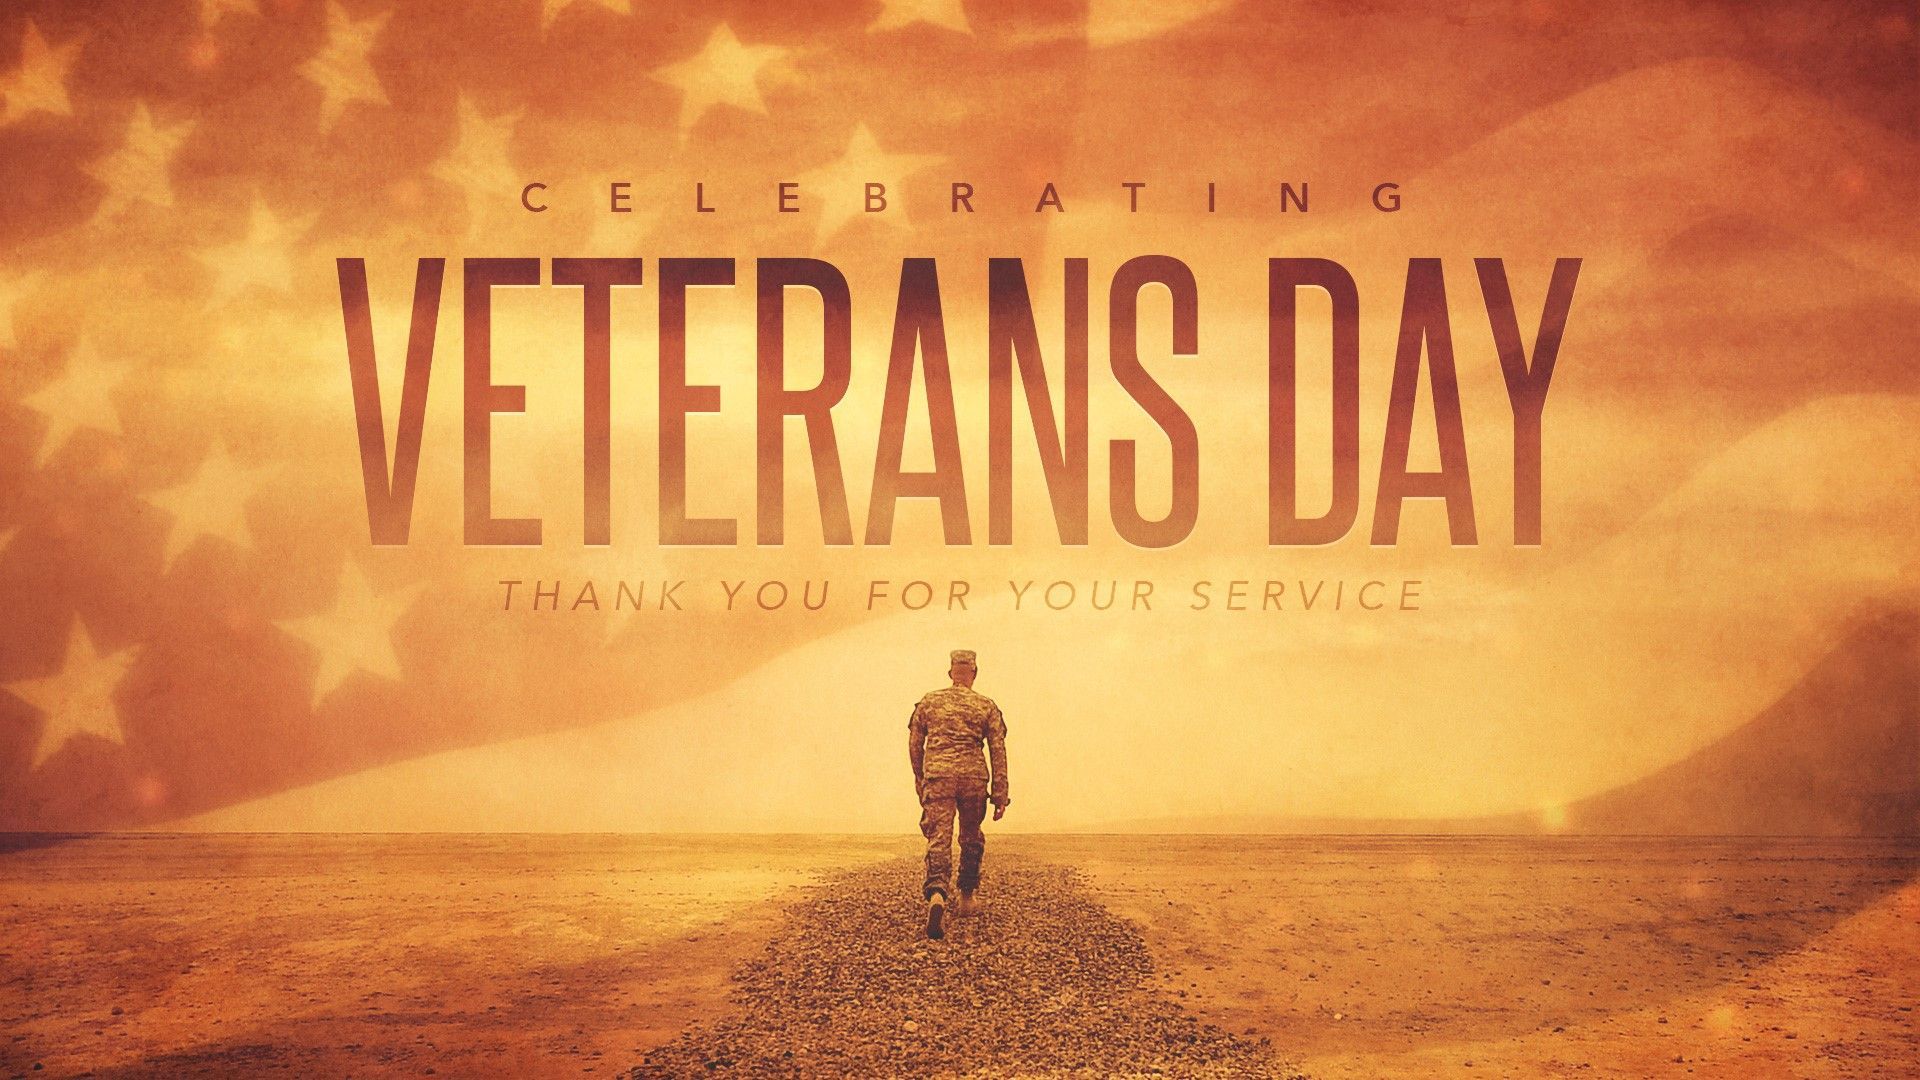 Free download Veterans Day Wallpapers Cool HDQ Live Veterans Day